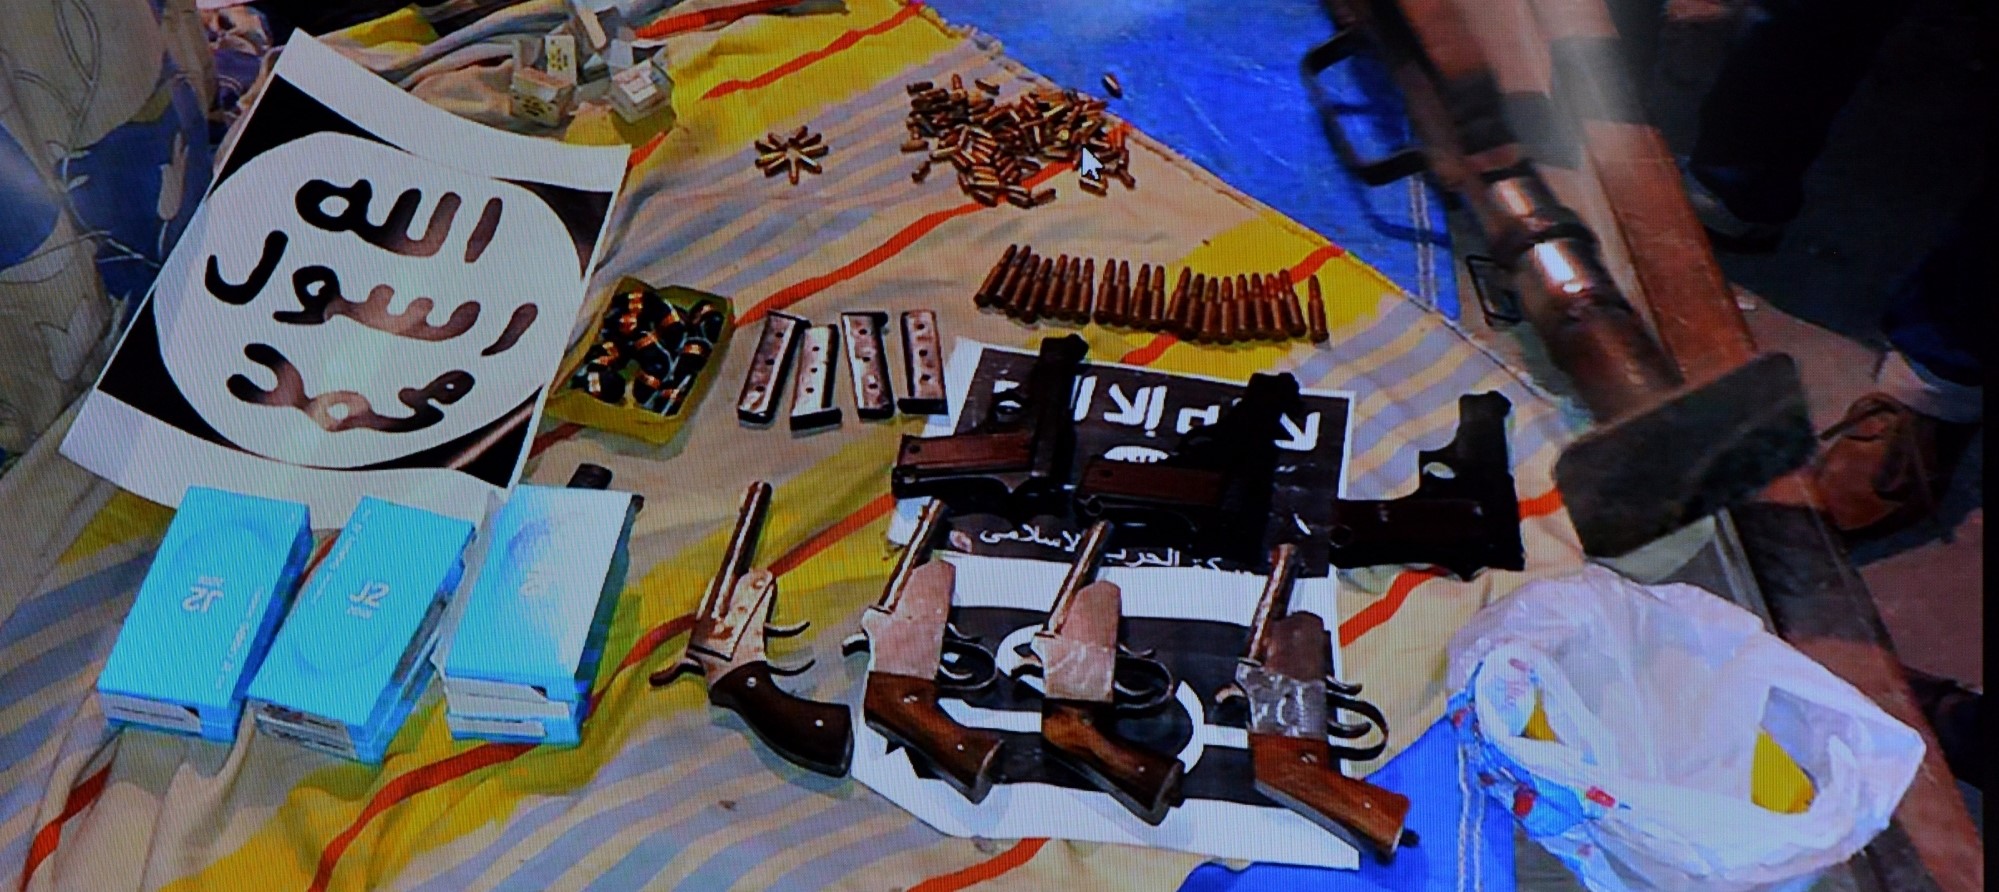 Arms and ammunition seized, 4 arrested in Bihar